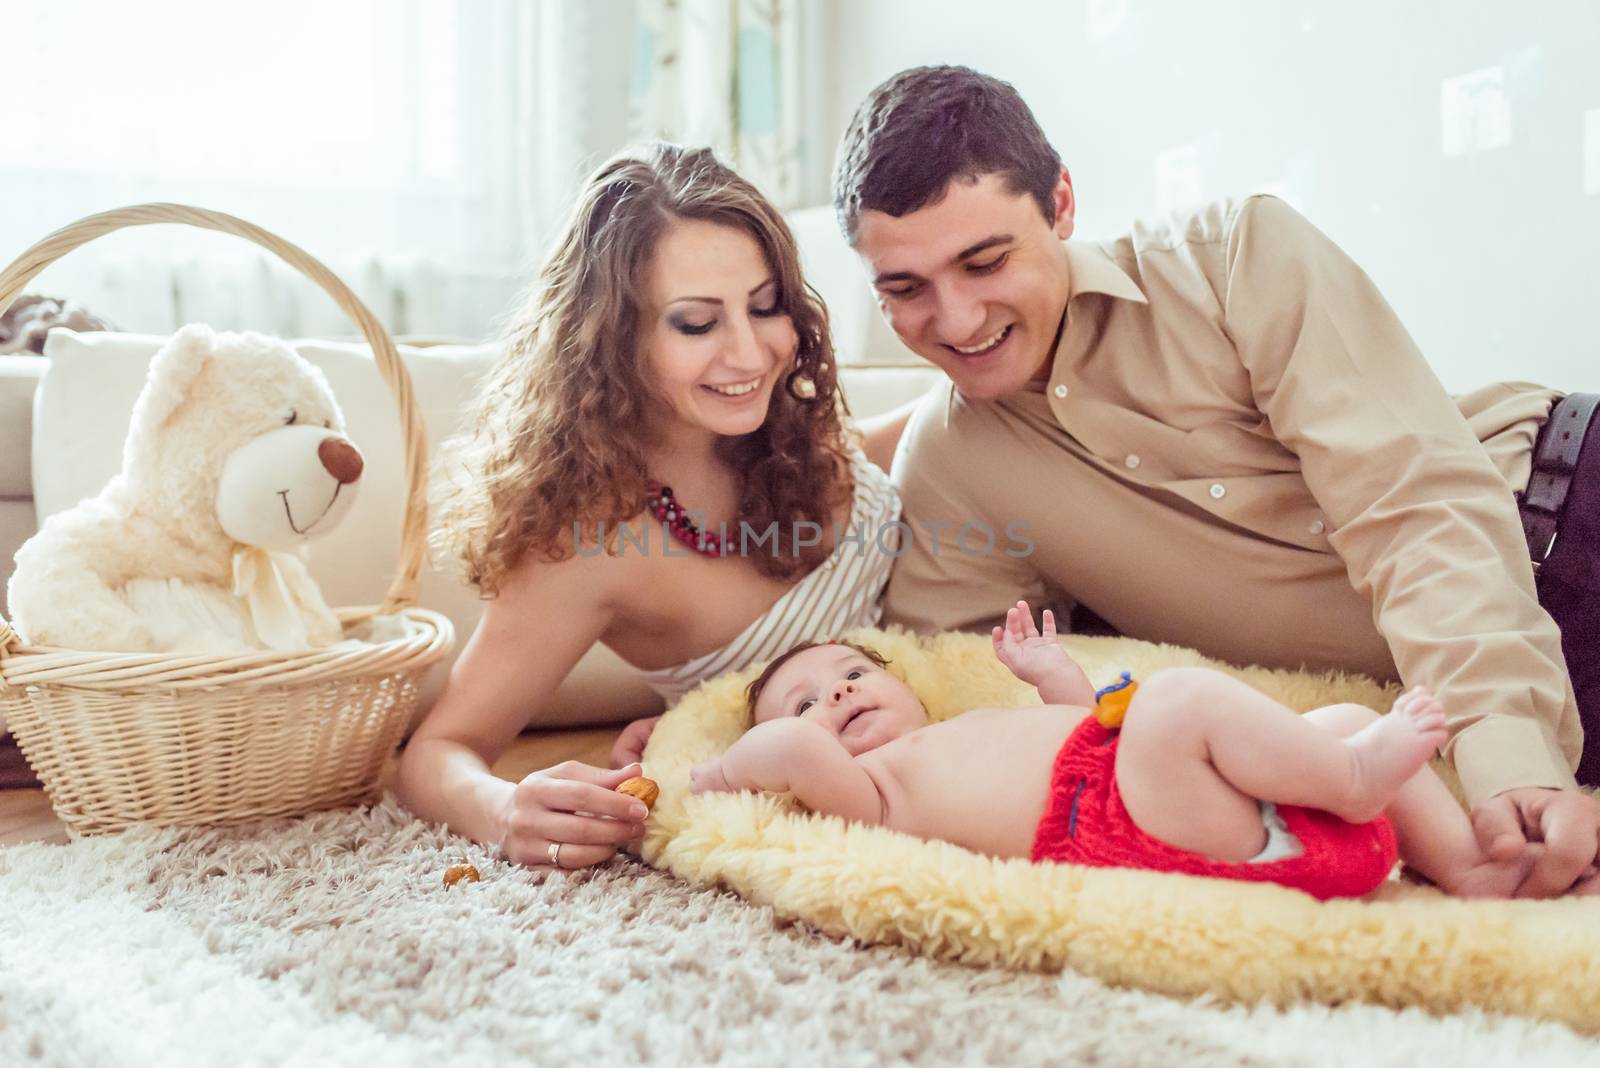 naked baby with her parents lying on soft blanket in the room